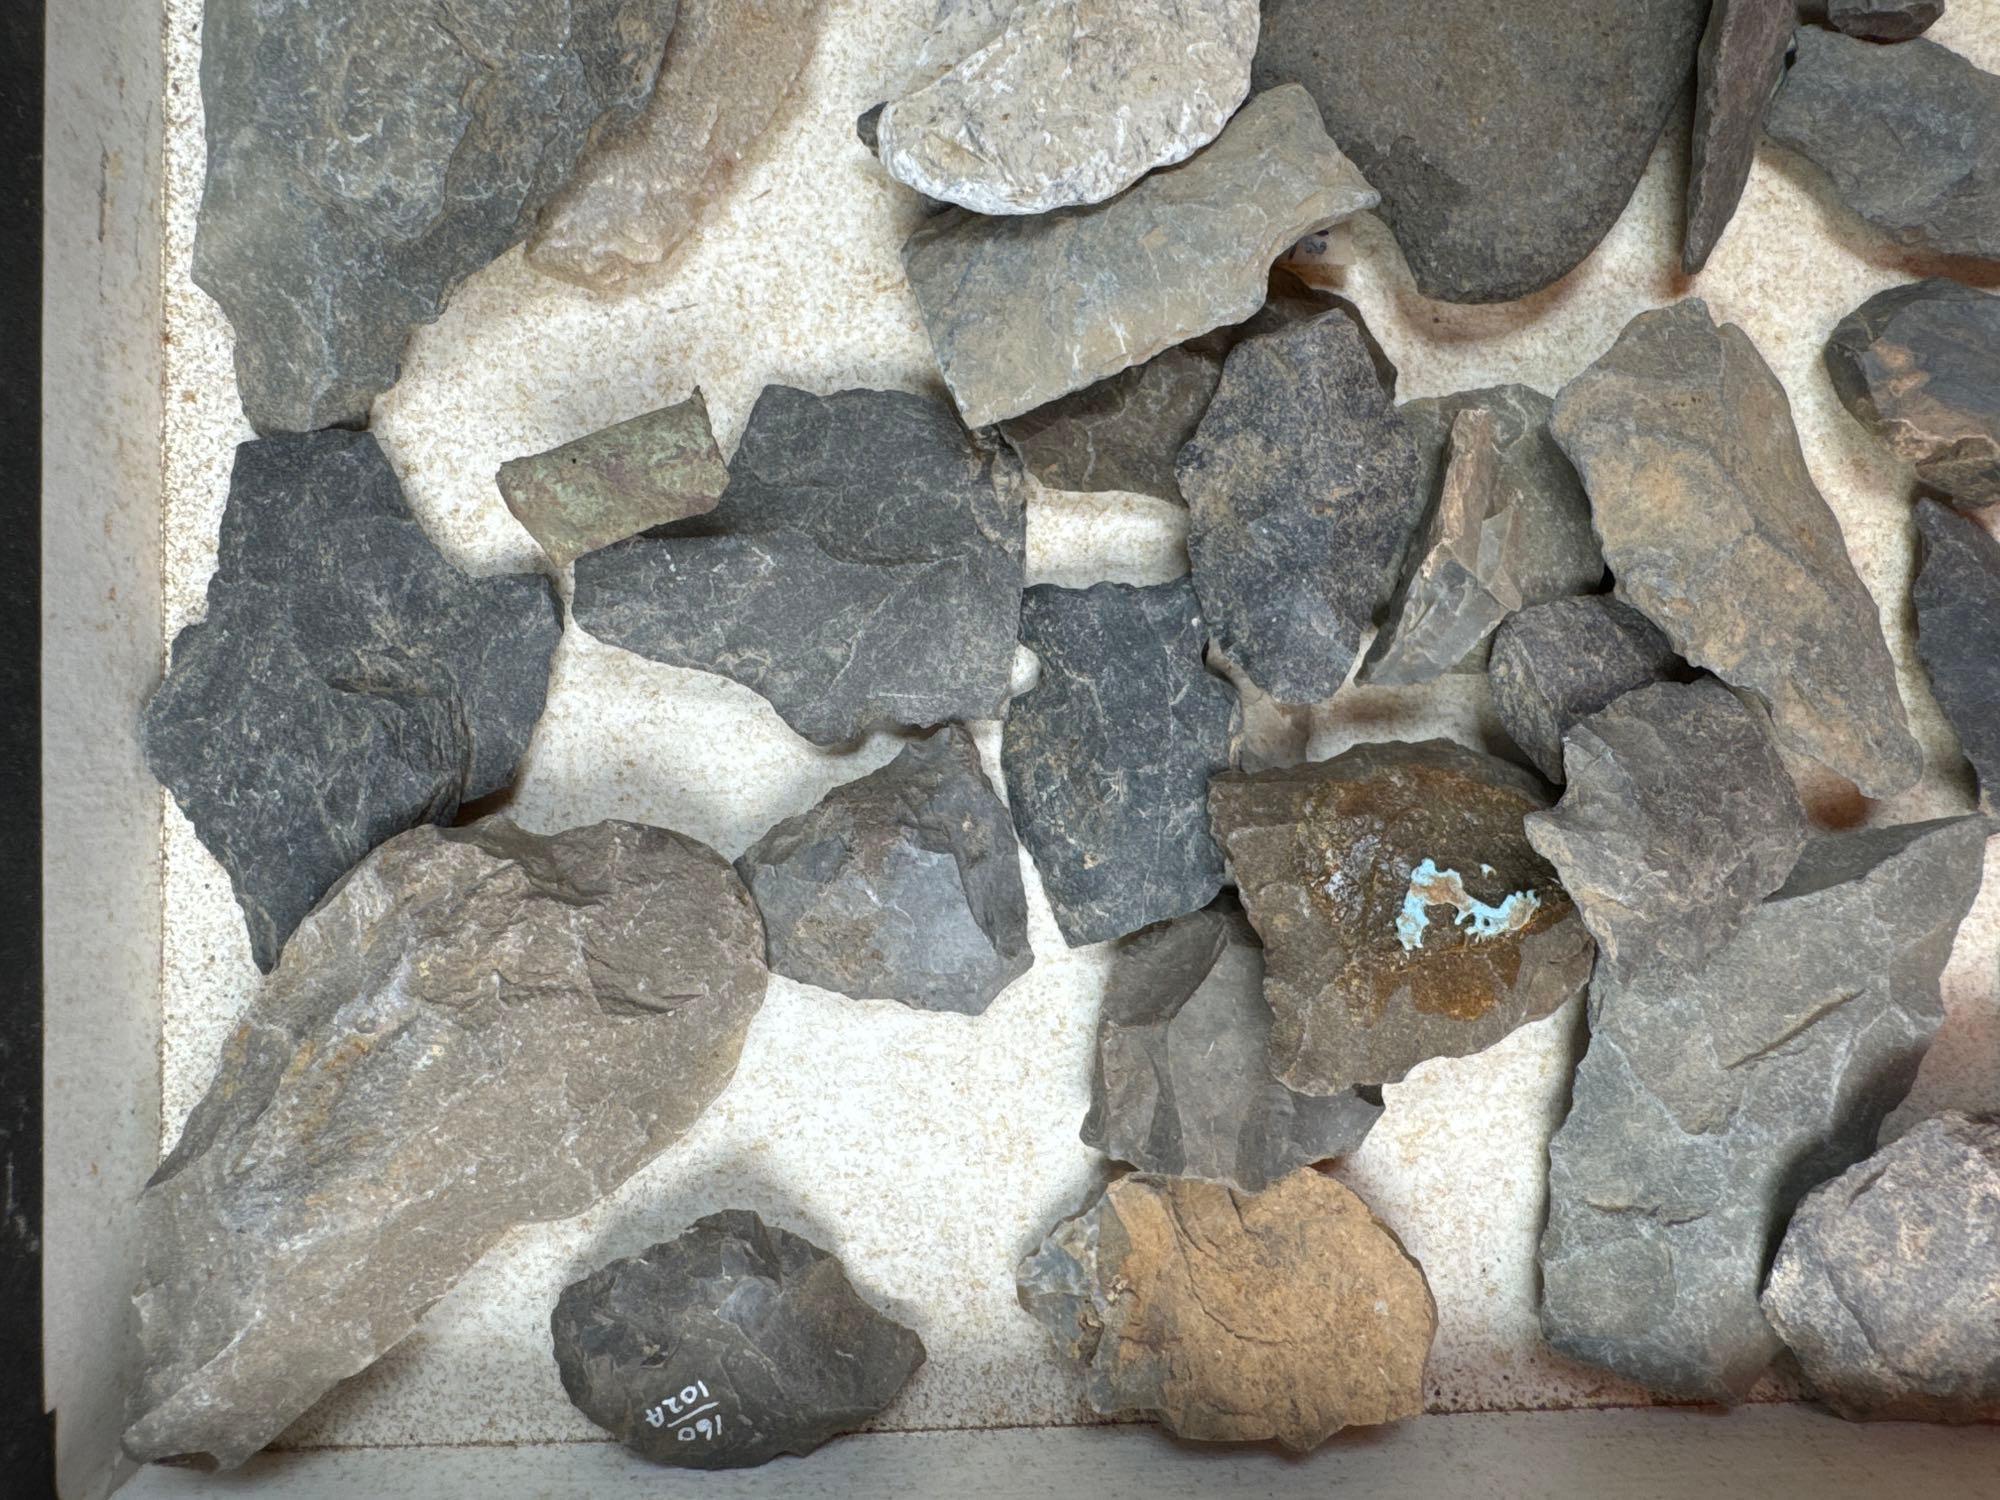 2 Flats of Various Site Material, Artifacts, Found in New York, Ex: Dave Summers Collection